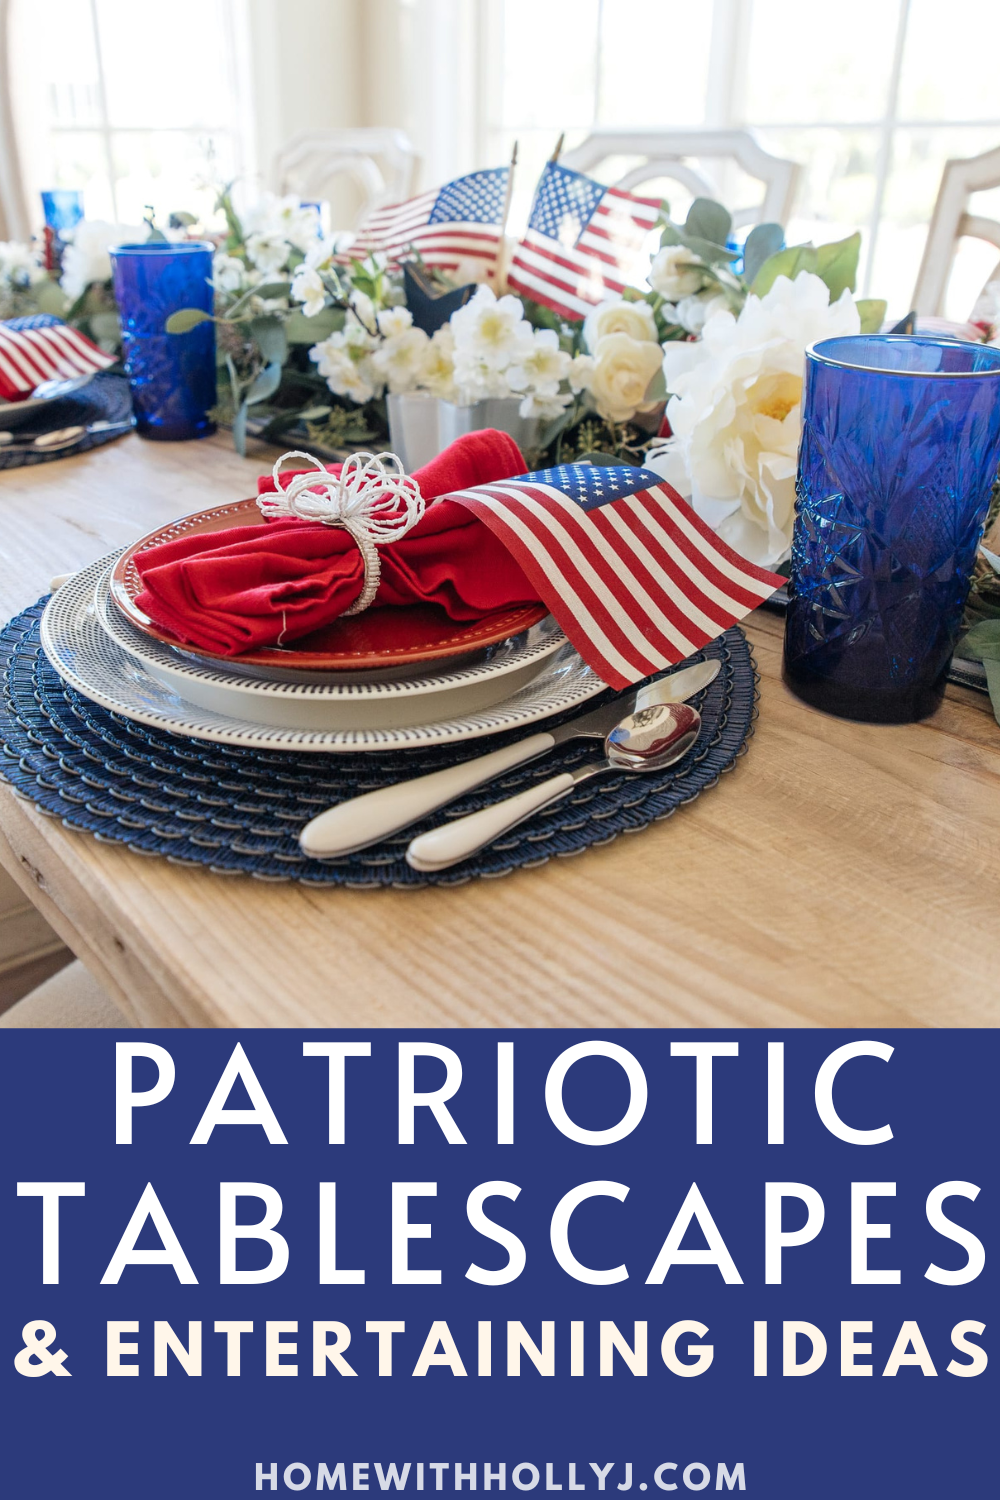 Hosting at Home for the Holidays - Patriotic Tablescapes and entertaining ideas for your upcomping Fourth of July celebrations.